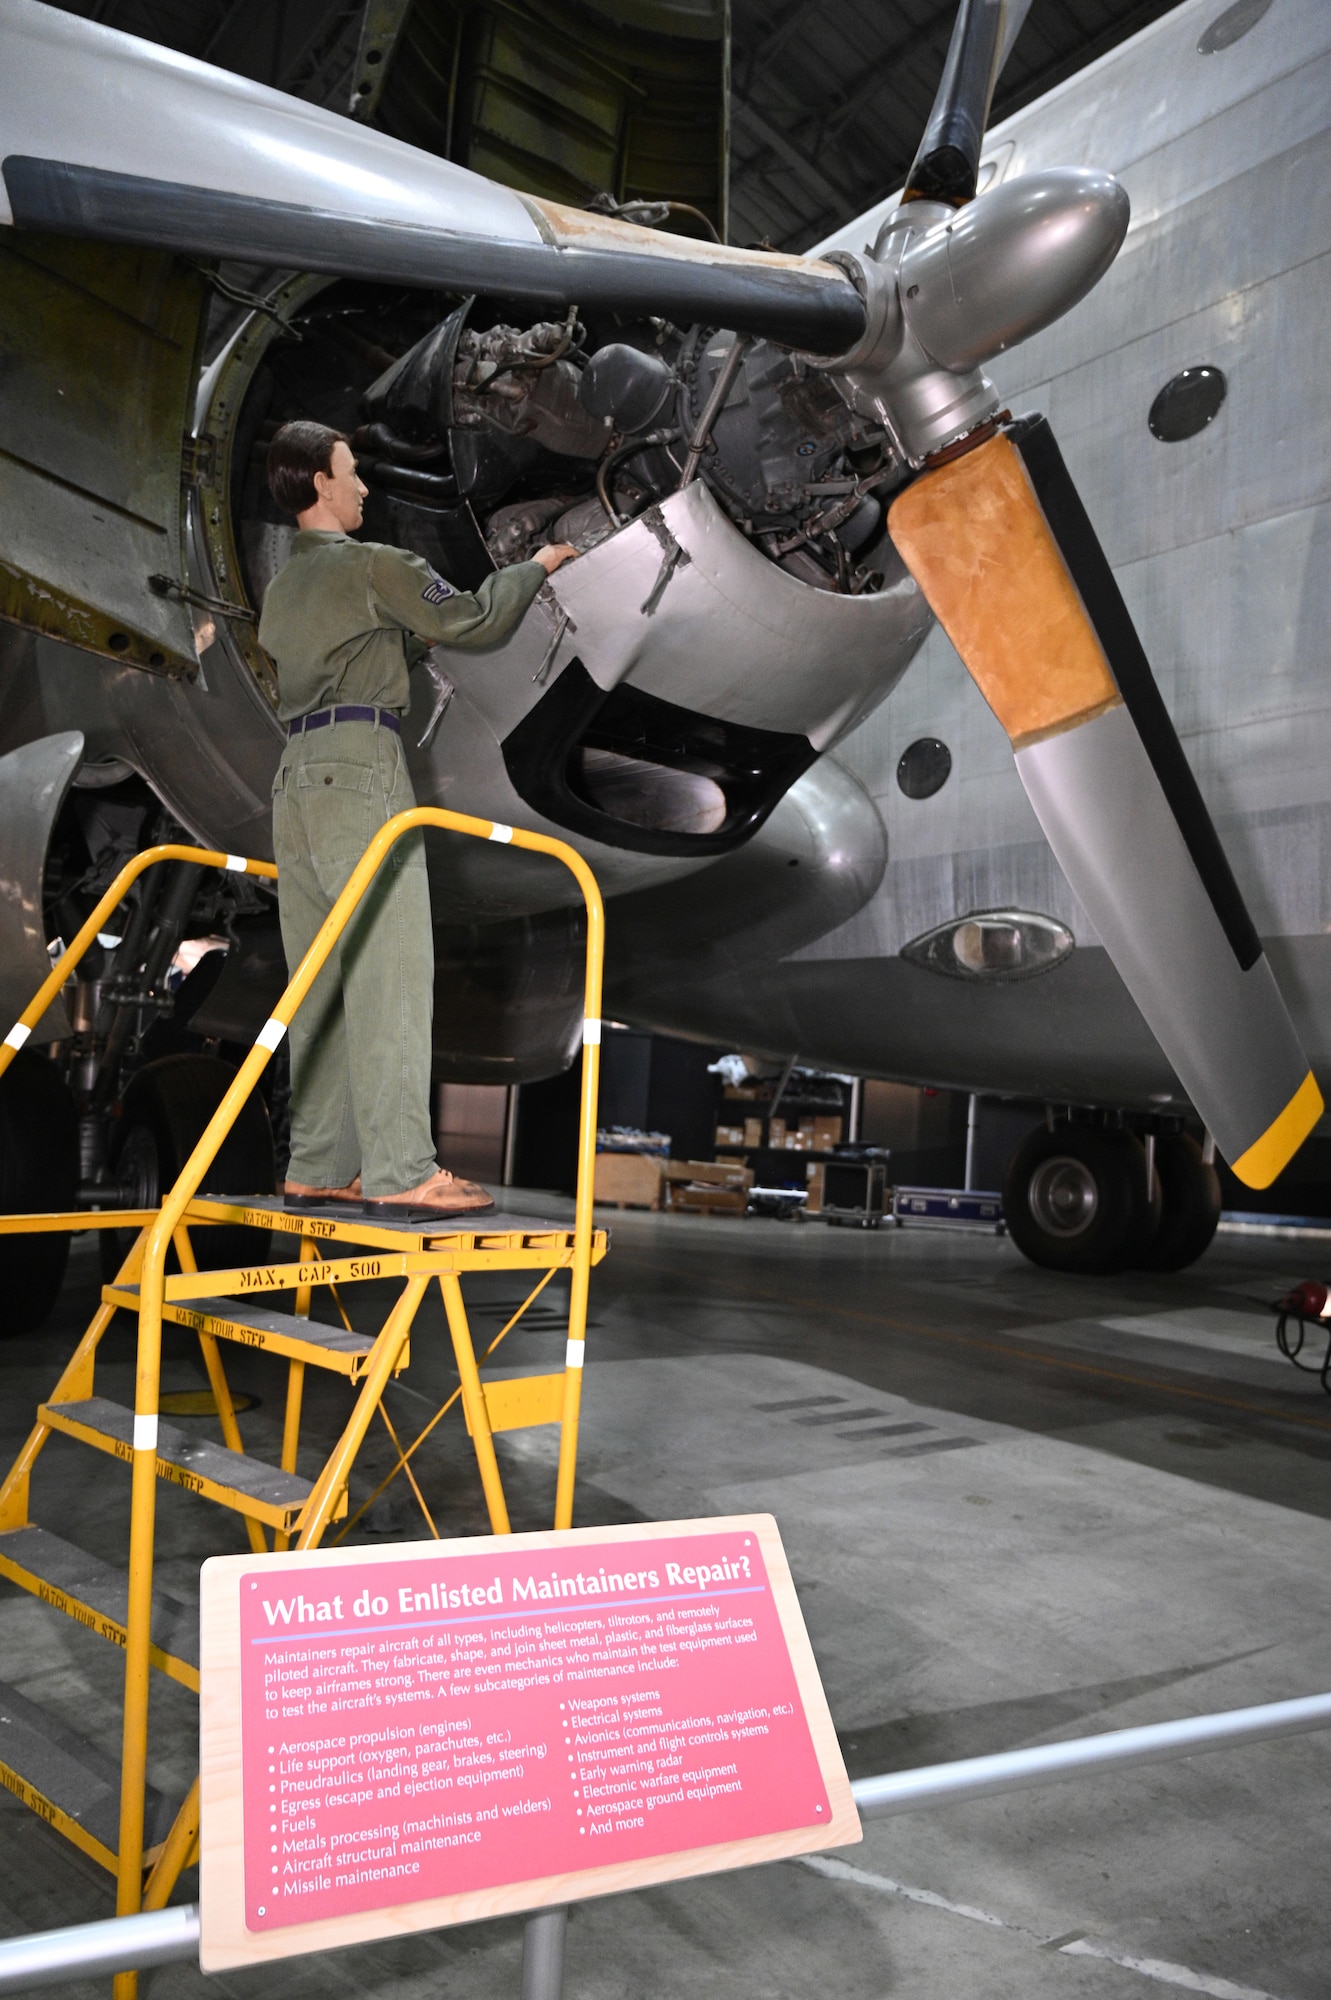 Enlisted Maintainers: Pride in Ownership